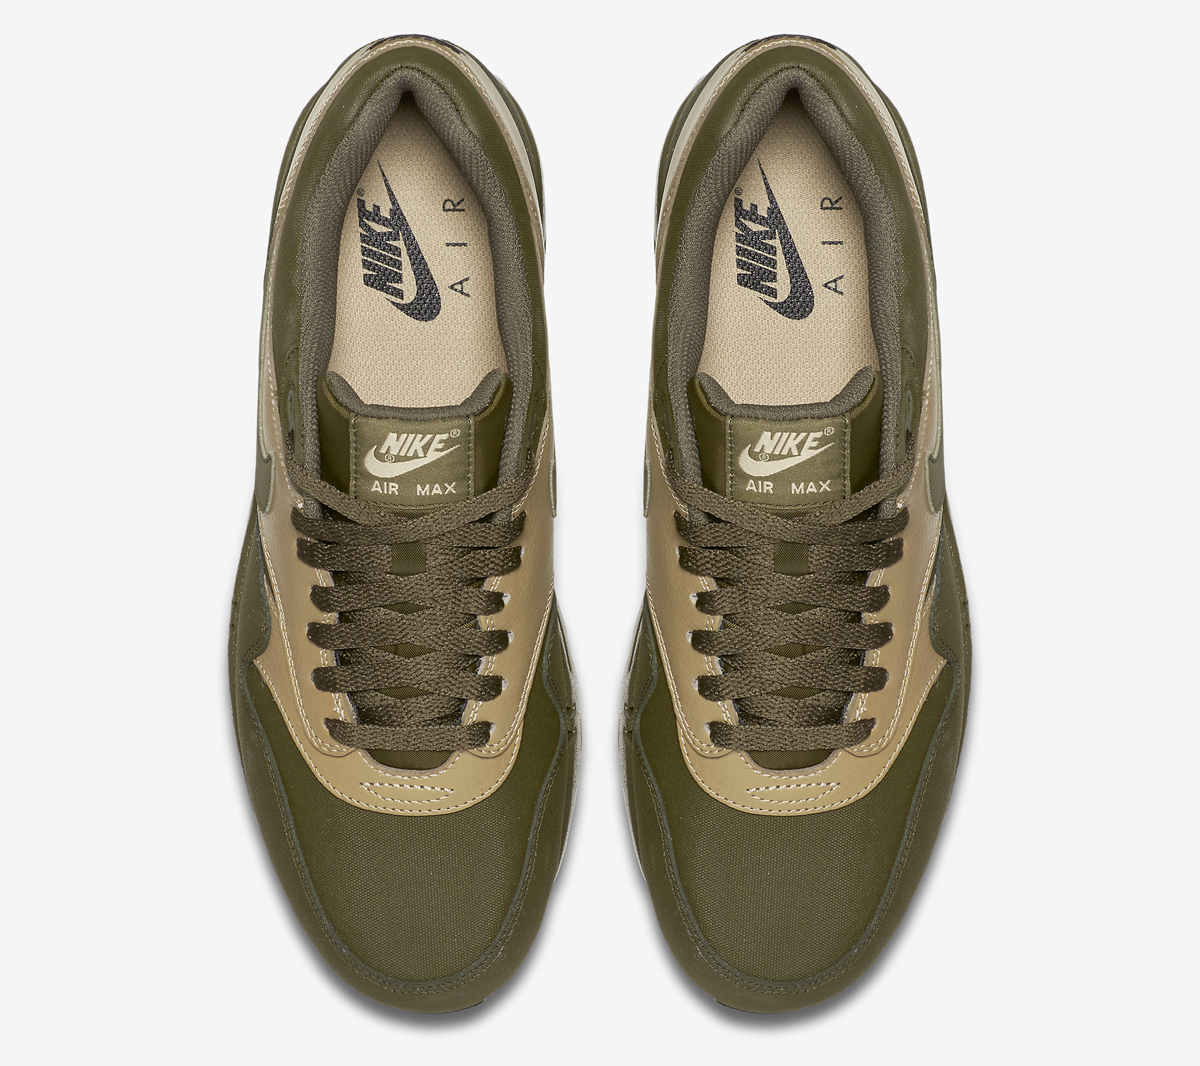 Nike Made a Camo Air Max 1 Without Using Camo | Sole Collector